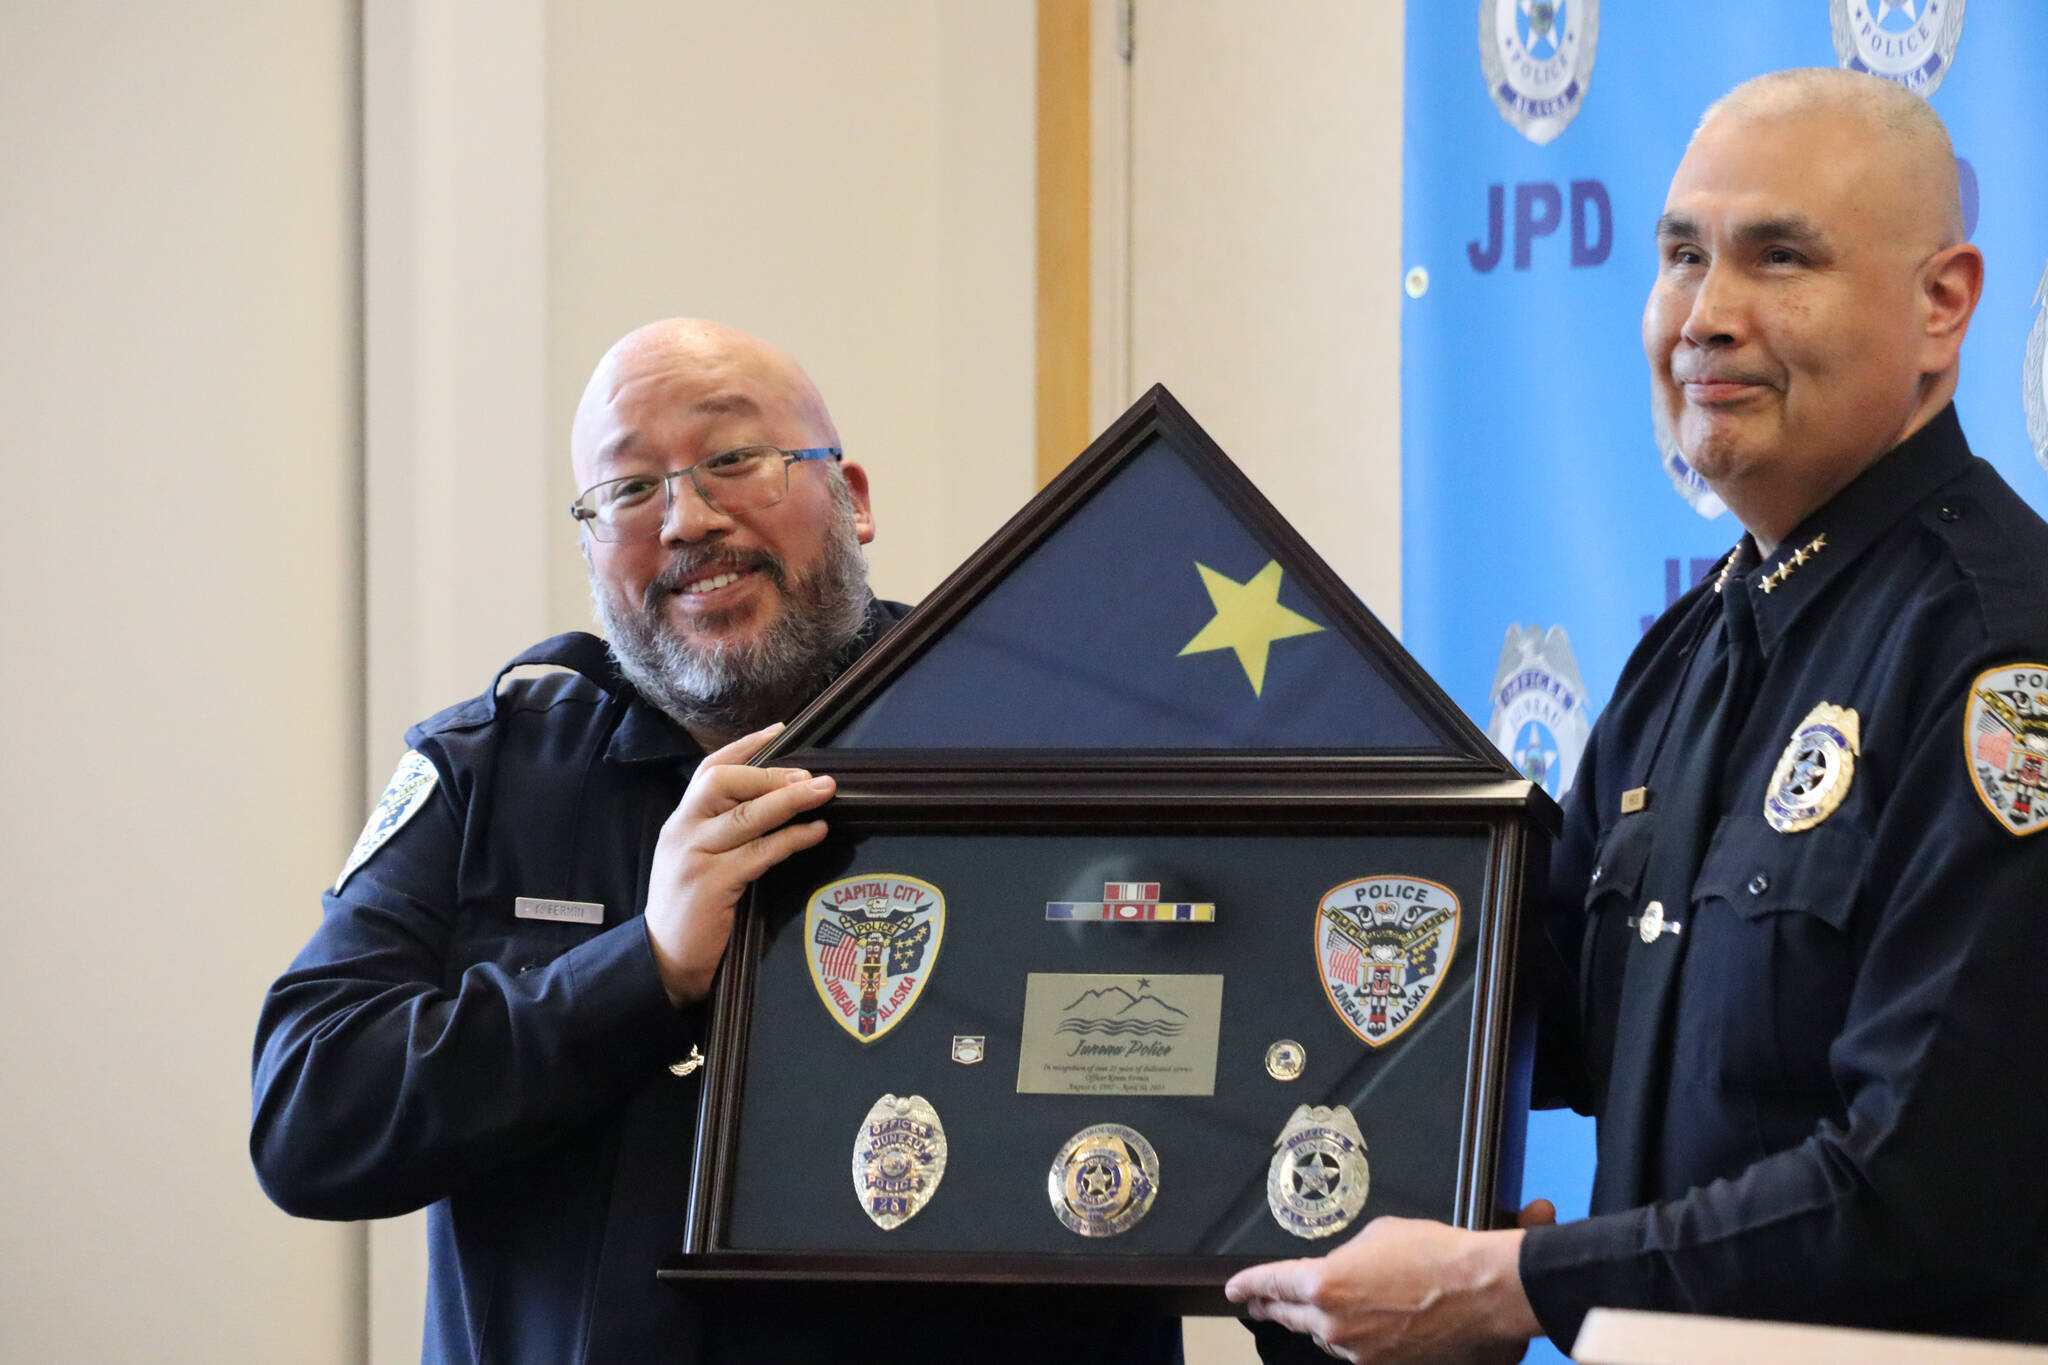 JPD Officer Kevin Fermin stands with Chief Ed Mercer while being presented with Fermin’s shadowbox, which is given to every officer at their retirement ceremony. (Jonson Kuhn / Juneau Empire)